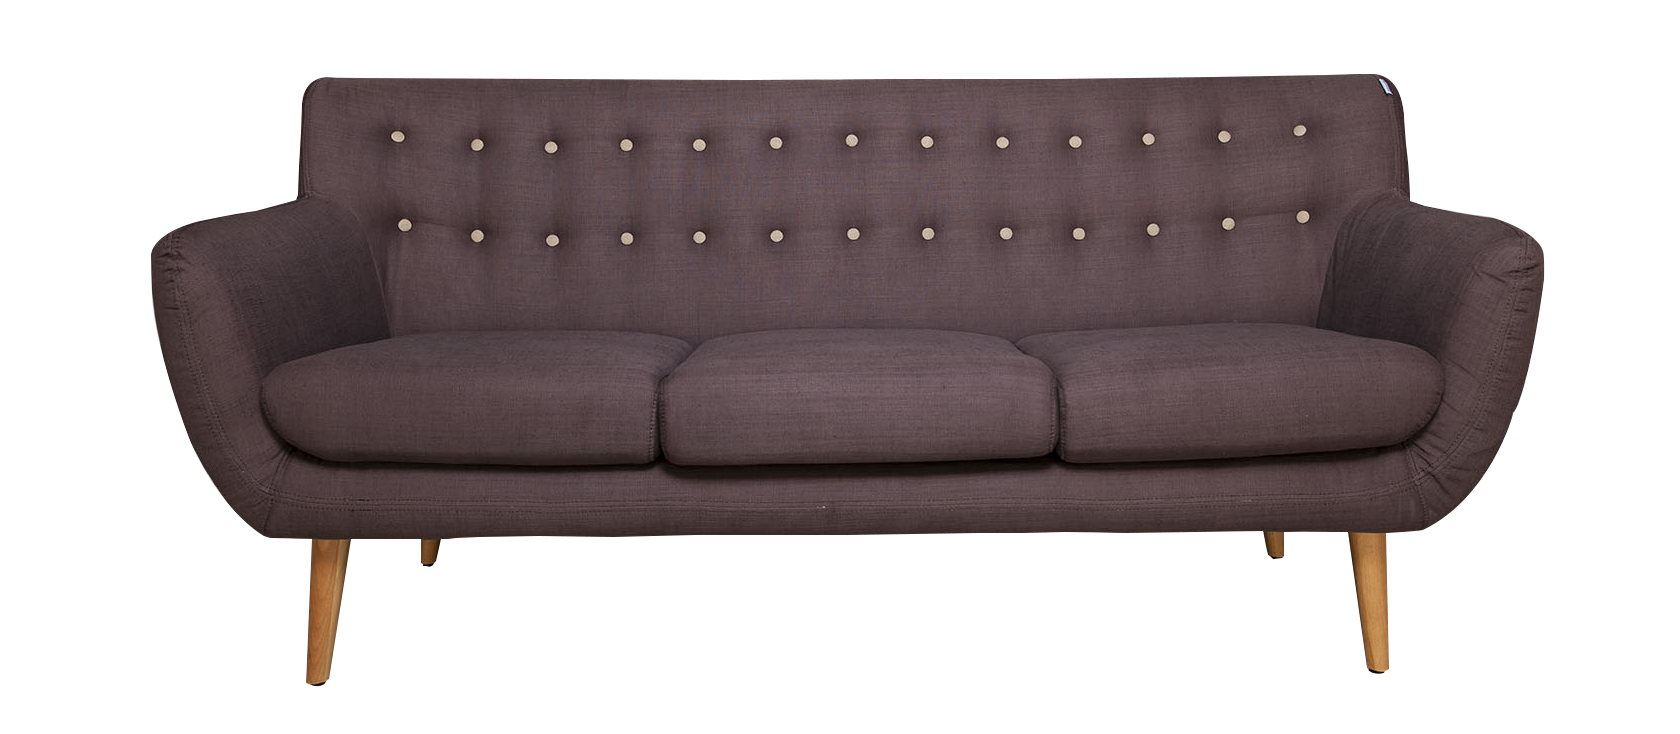 Couch PNG HQ Image pngteam.com